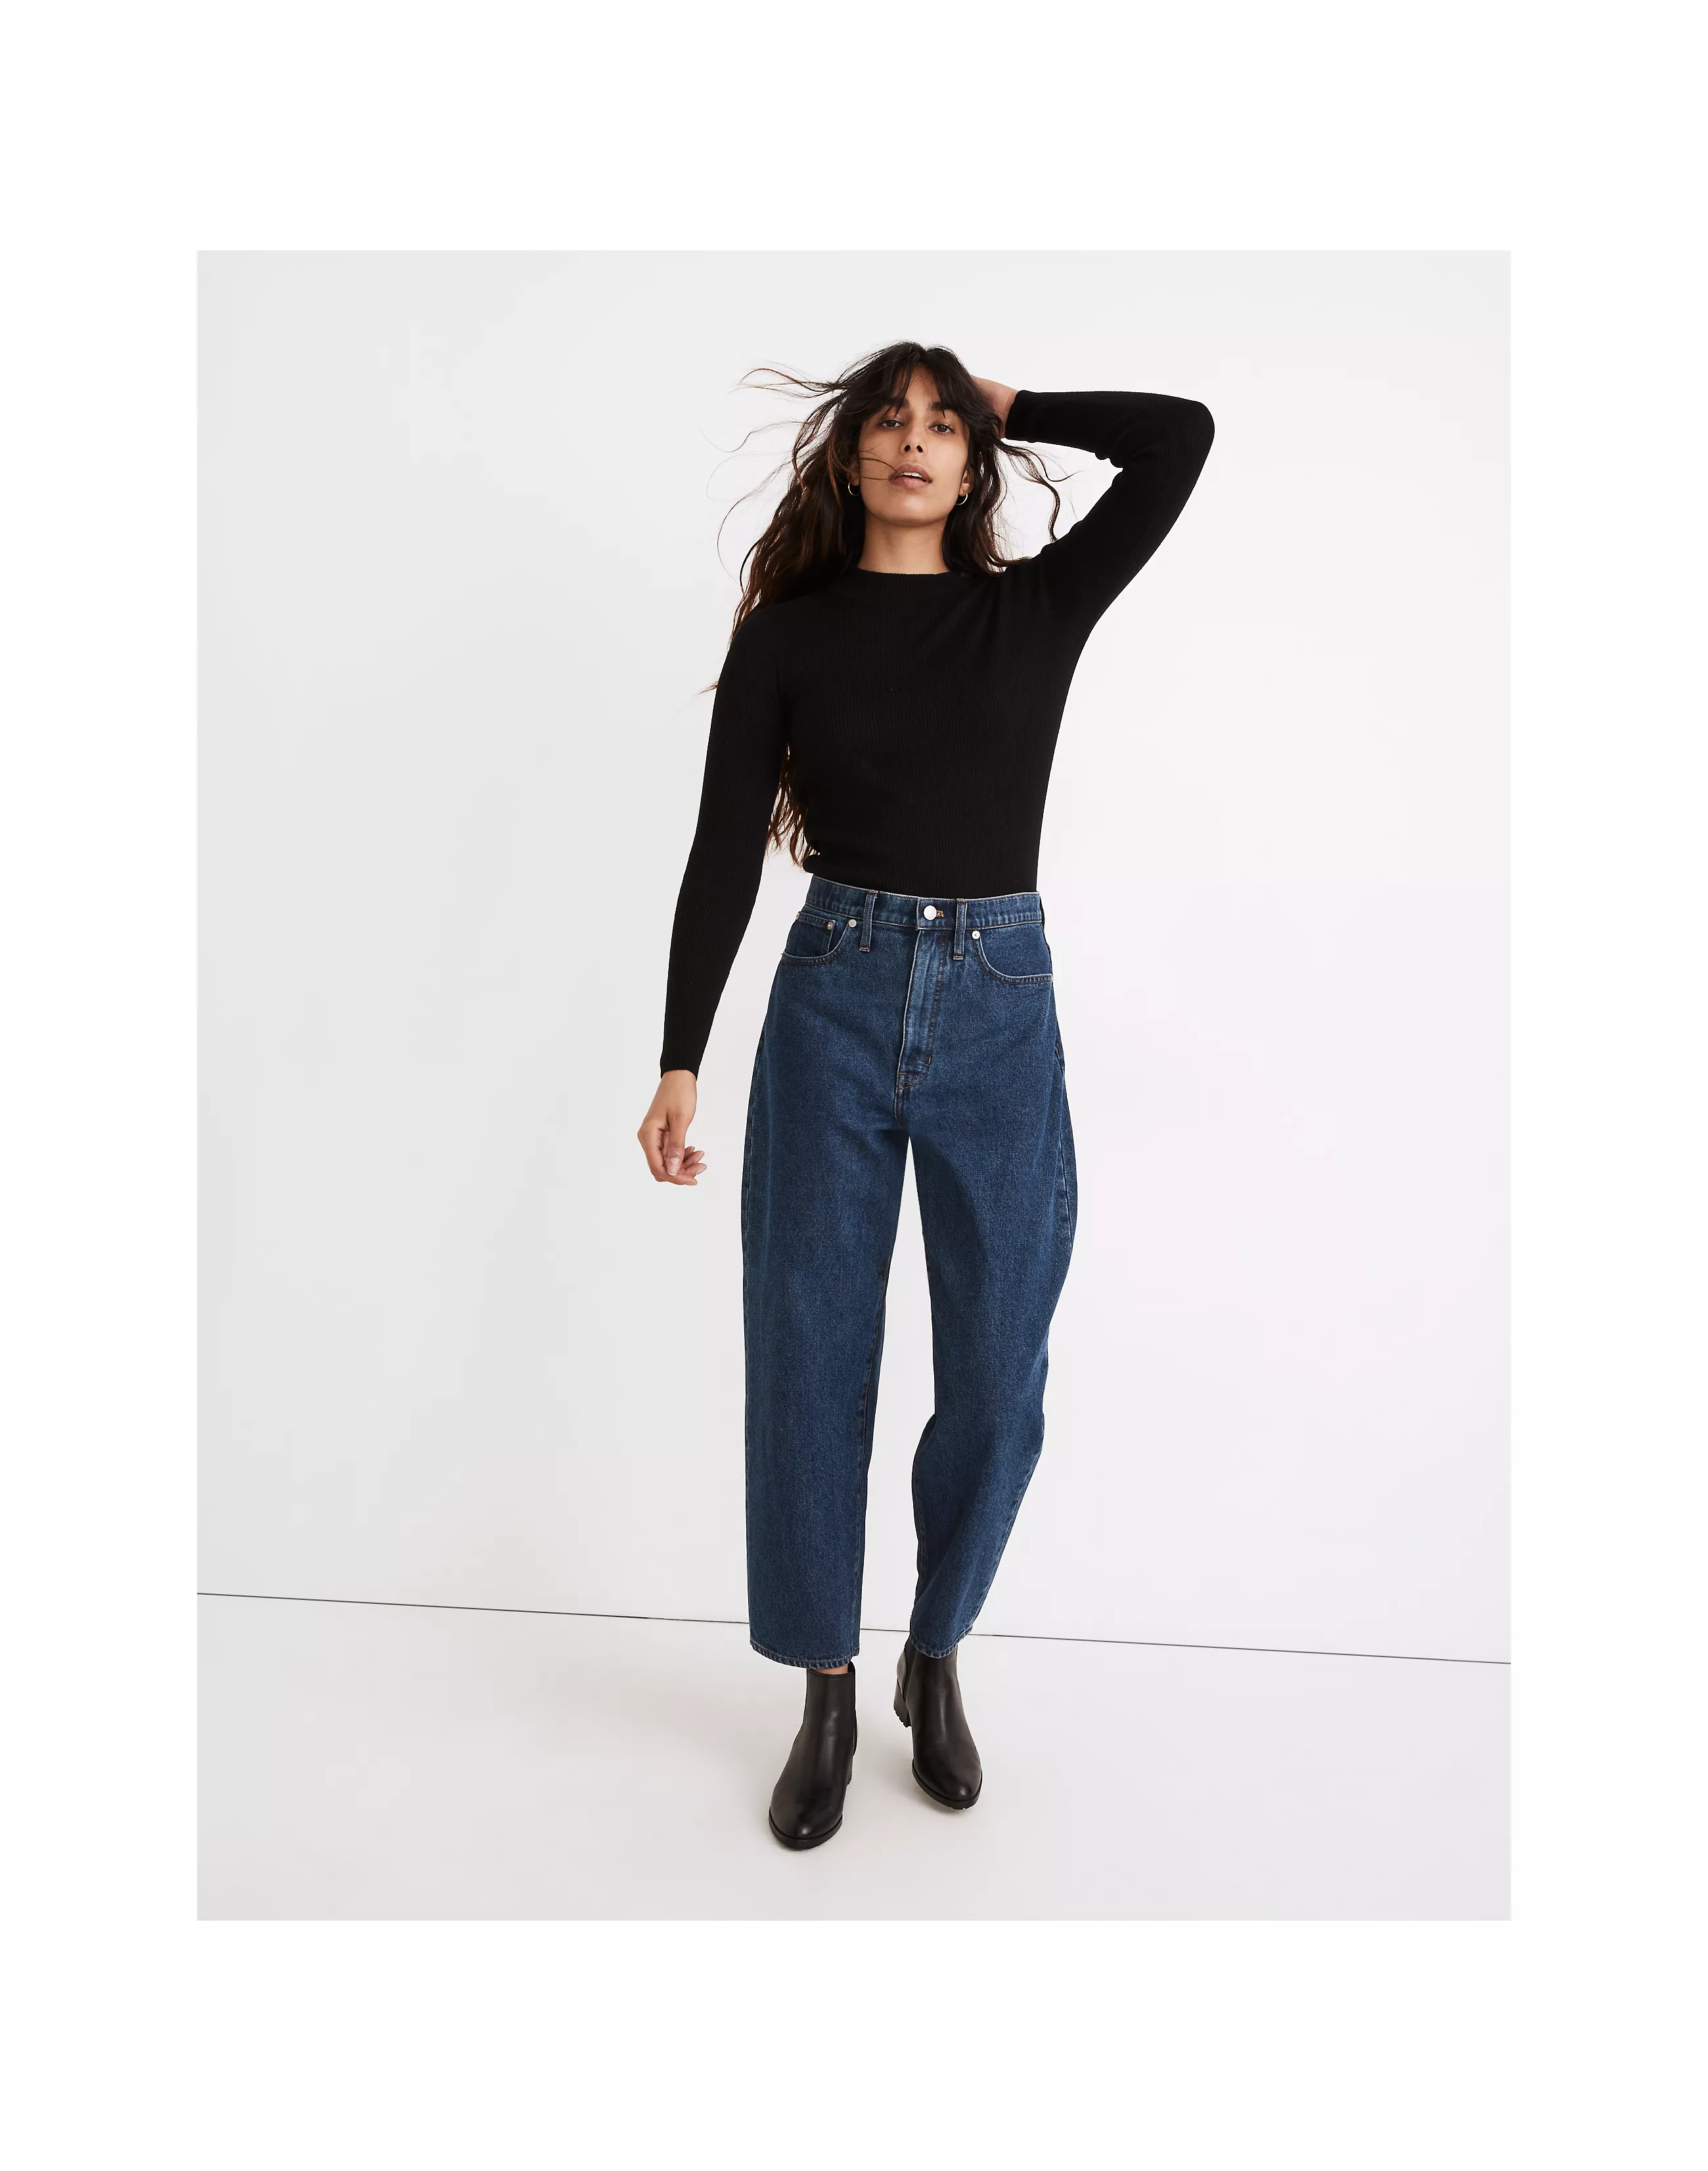 Most Comfortable Jeans For Women - Cozy Pants Styles